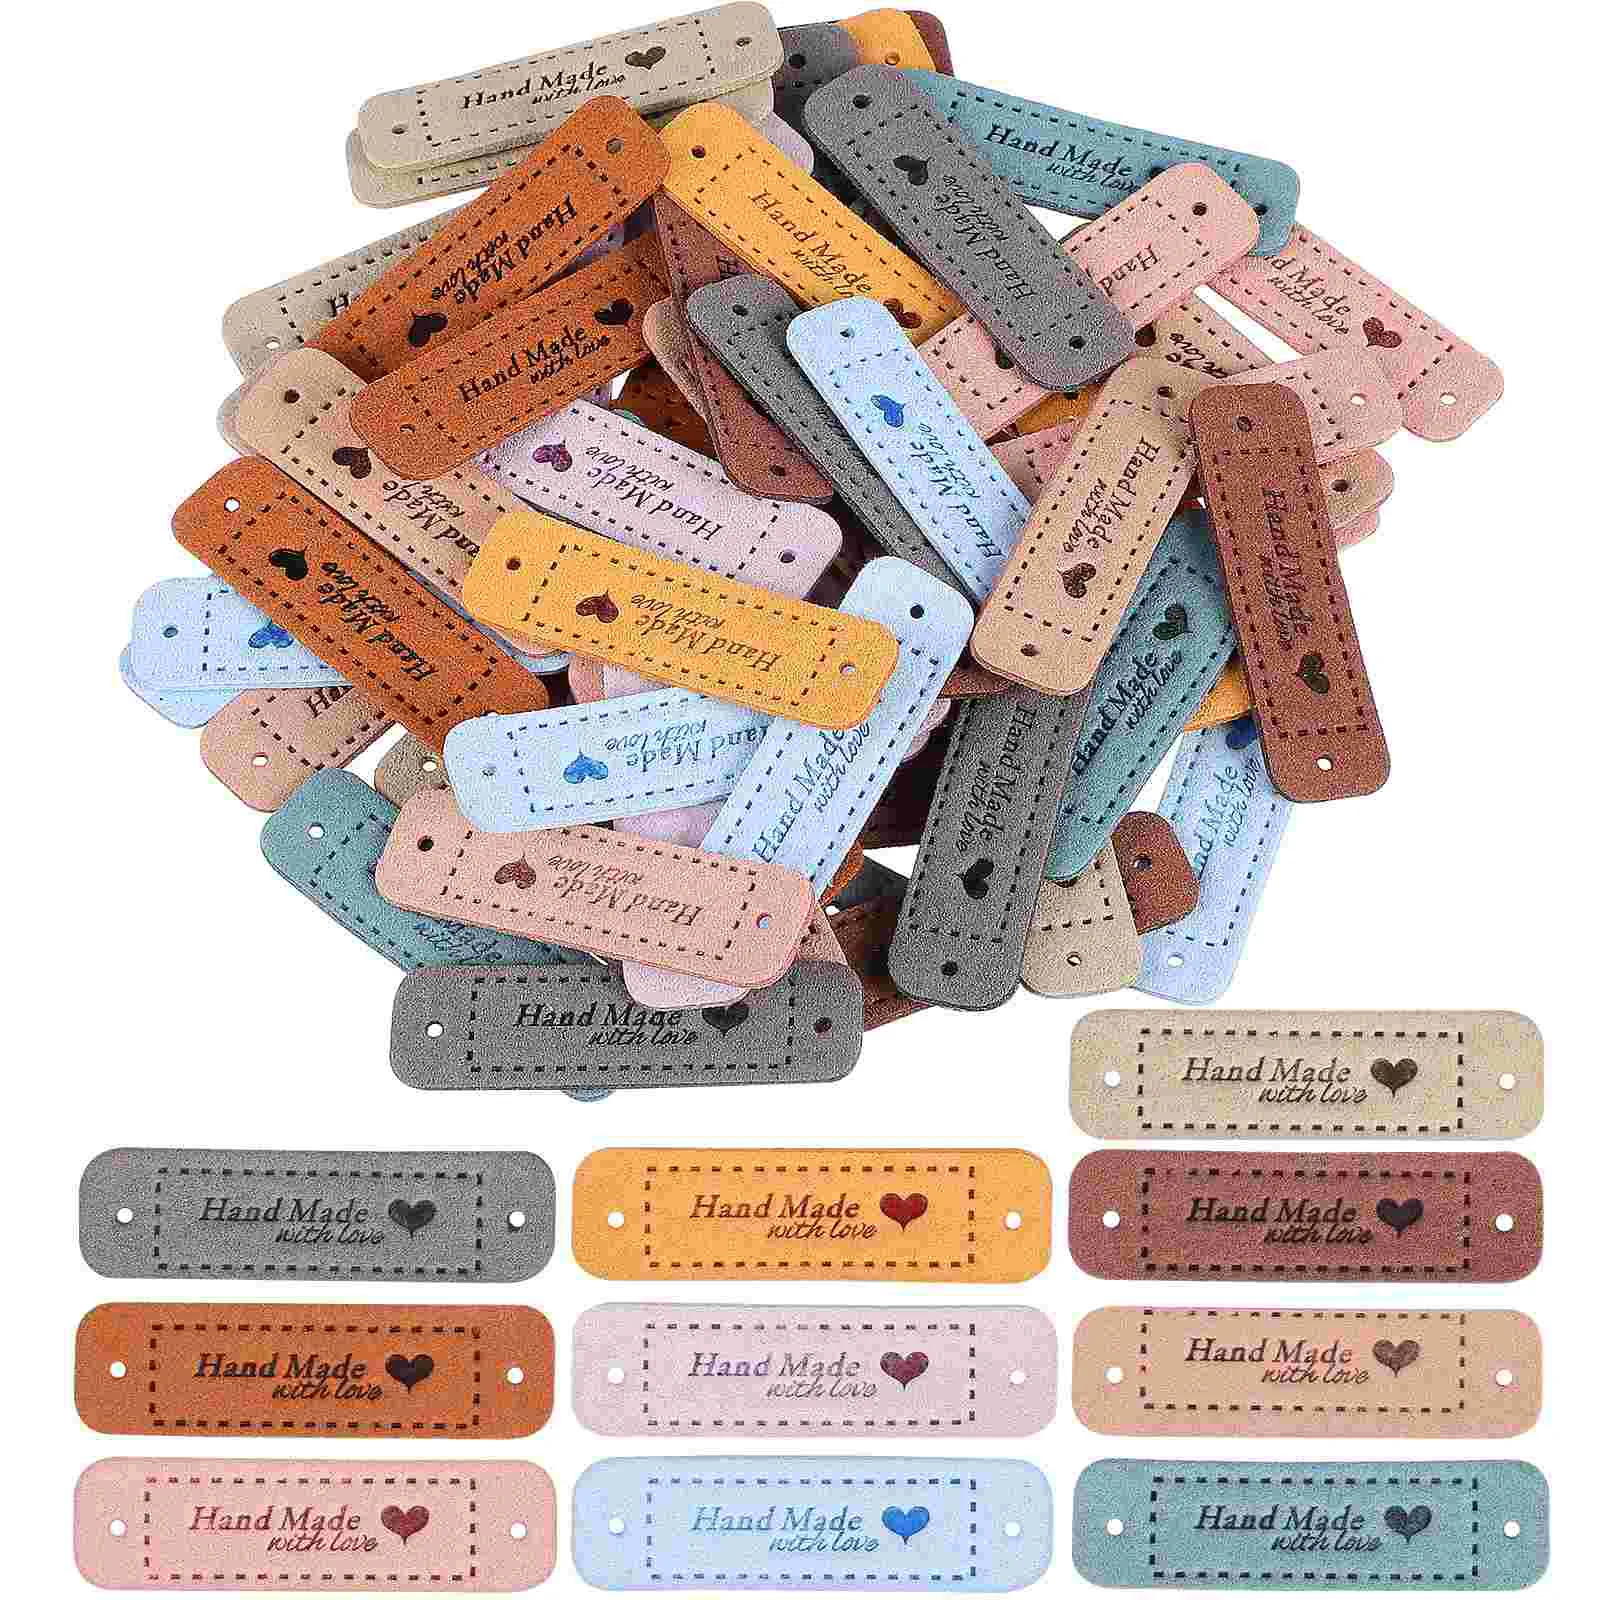 

60 Pcs Handmade Label DIY Accessories Labels Knitting Clothes Crafts Colored Tabs Textured Embossed Tag Embellishment